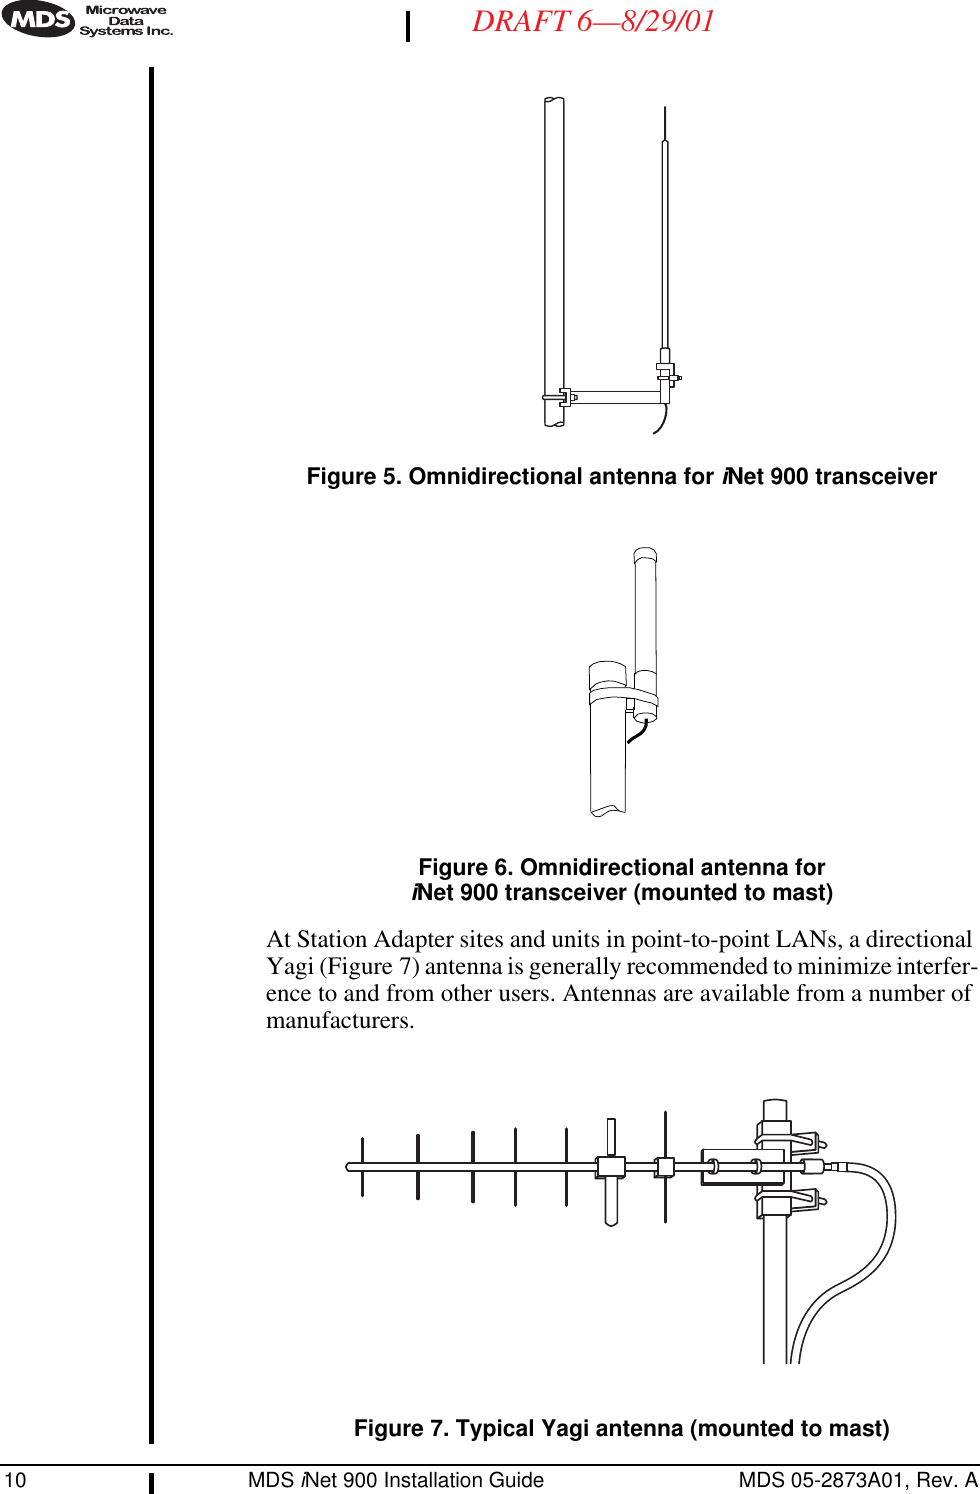 10 MDS iNet 900 Installation Guide MDS 05-2873A01, Rev. ADRAFT 6—8/29/01Invisible place holderFigure 5. Omnidirectional antenna for iNet 900 transceiverInvisible place holderFigure 6. Omnidirectional antenna foriNet 900 transceiver (mounted to mast)At Station Adapter sites and units in point-to-point LANs, a directional Yagi (Figure 7) antenna is generally recommended to minimize interfer-ence to and from other users. Antennas are available from a number of manufacturers.Invisible place holderFigure 7. Typical Yagi antenna (mounted to mast)